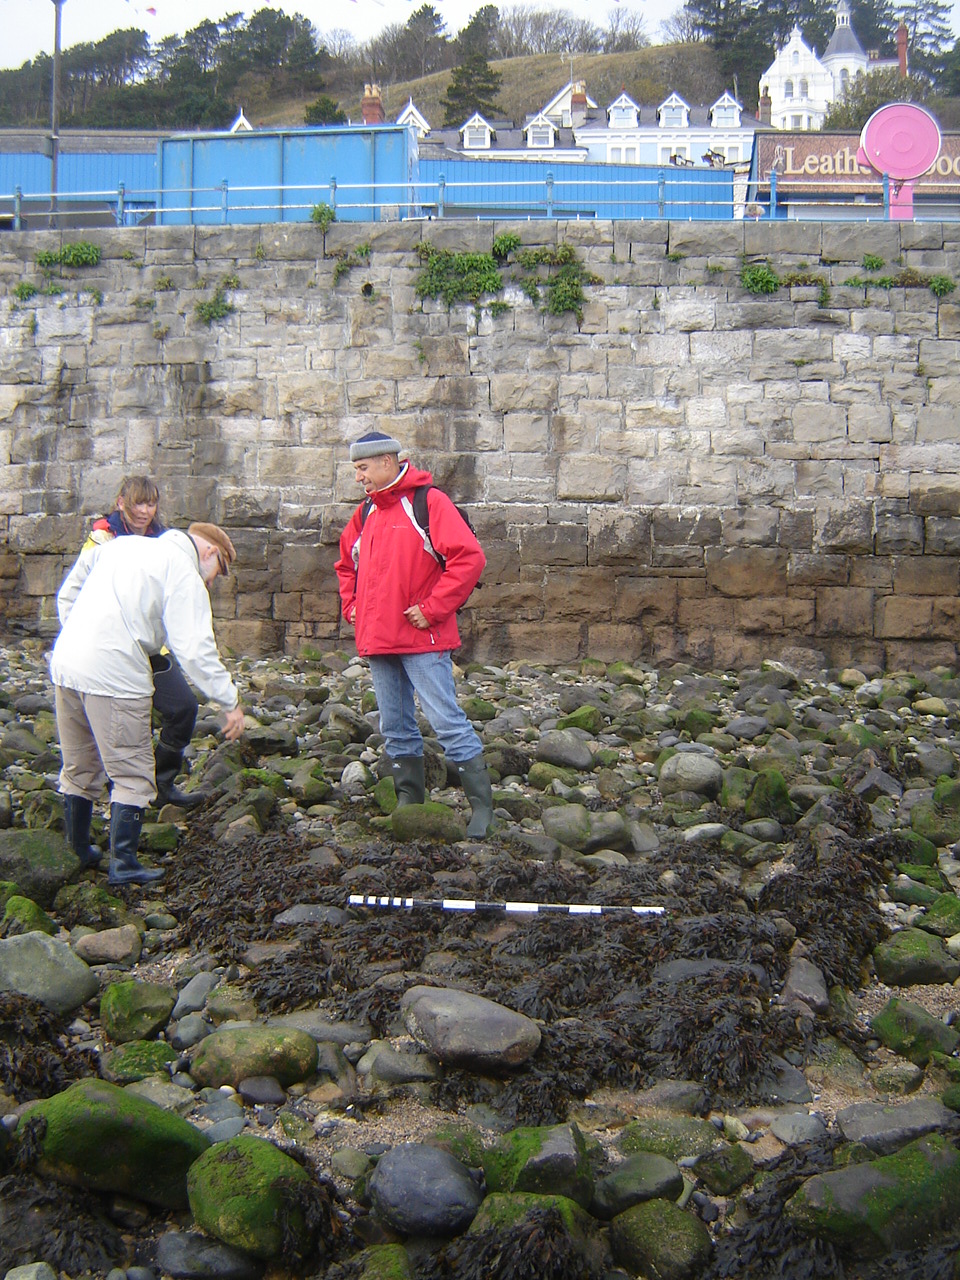 A stone feature highlighted by weed growth, and thought to be the base of an old jetty